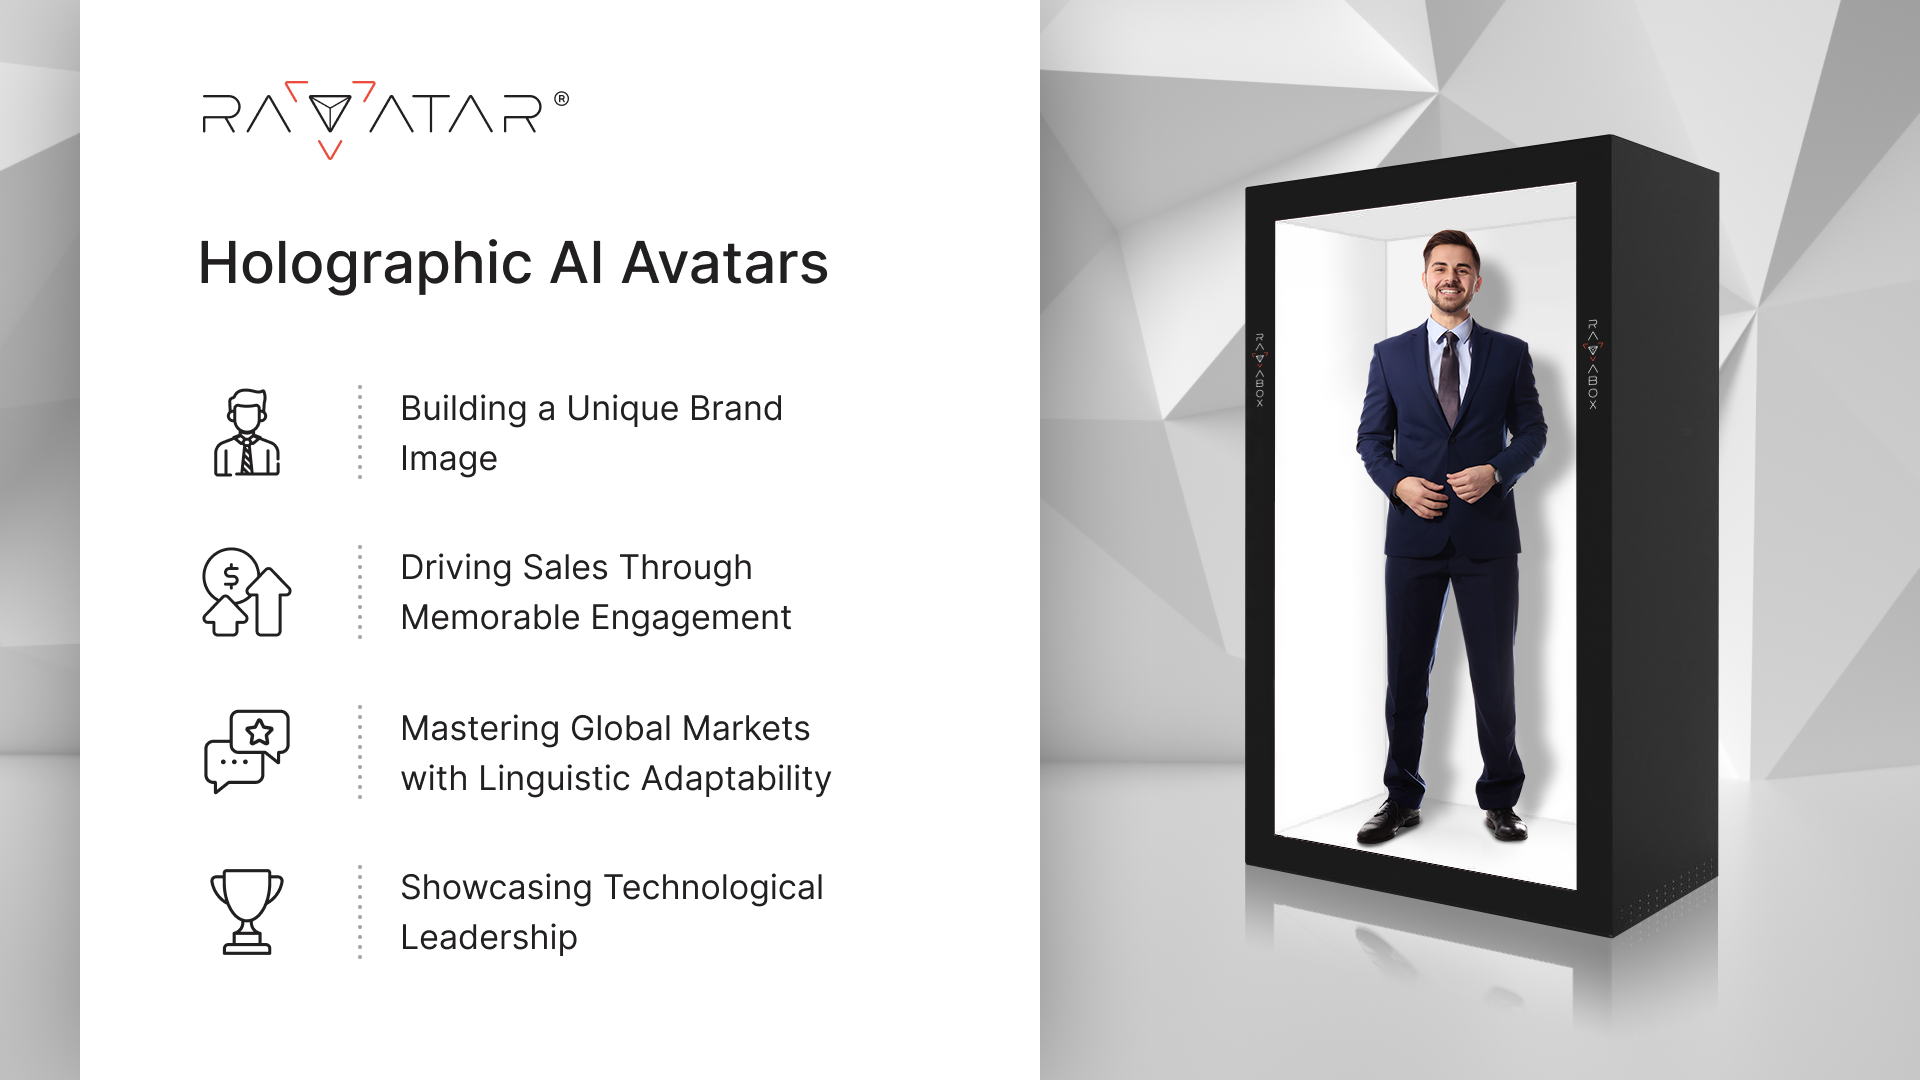 elevate brand image with ai and hologram projection as innovative brand promotion with holographic digital humans